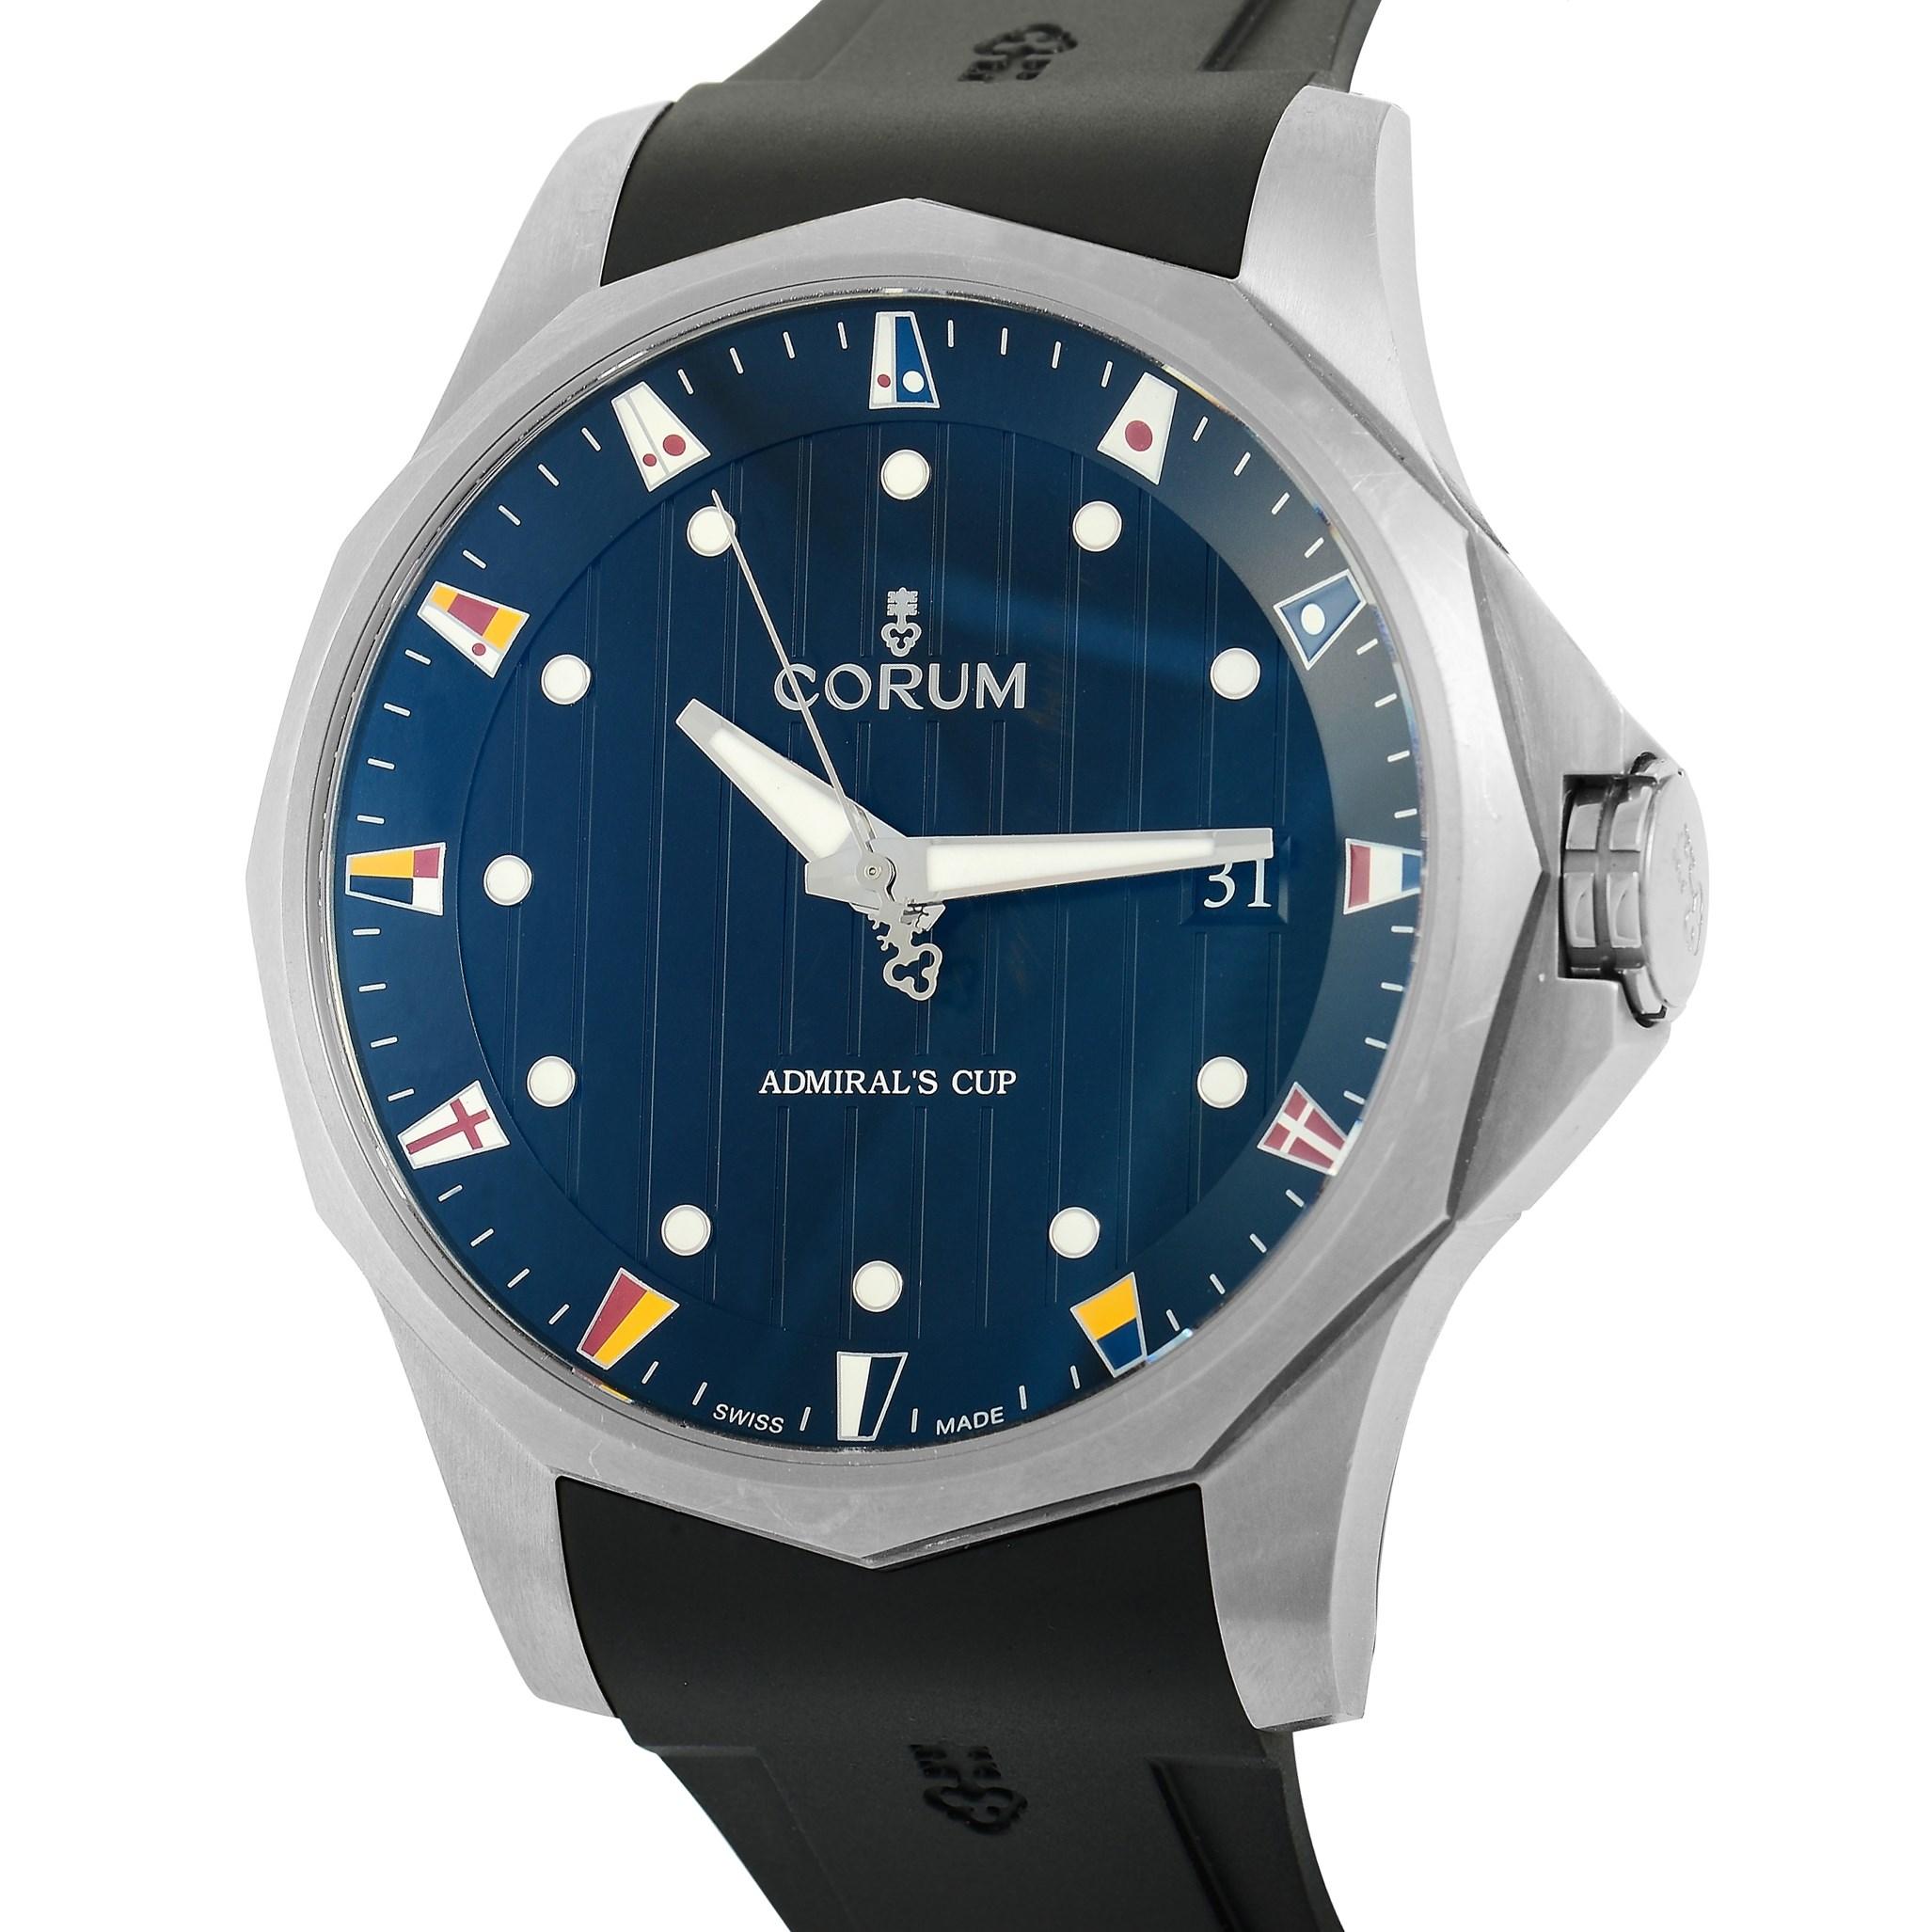 This Corum Admirals Cup Yachting Regatta 47 mm Stainless Steel Watch, reference number 01.0146, comes with a stainless steel case that measures 47 mm in diameter. The case is presented on a sleek black rubber strap with tang clasp. The blue textured